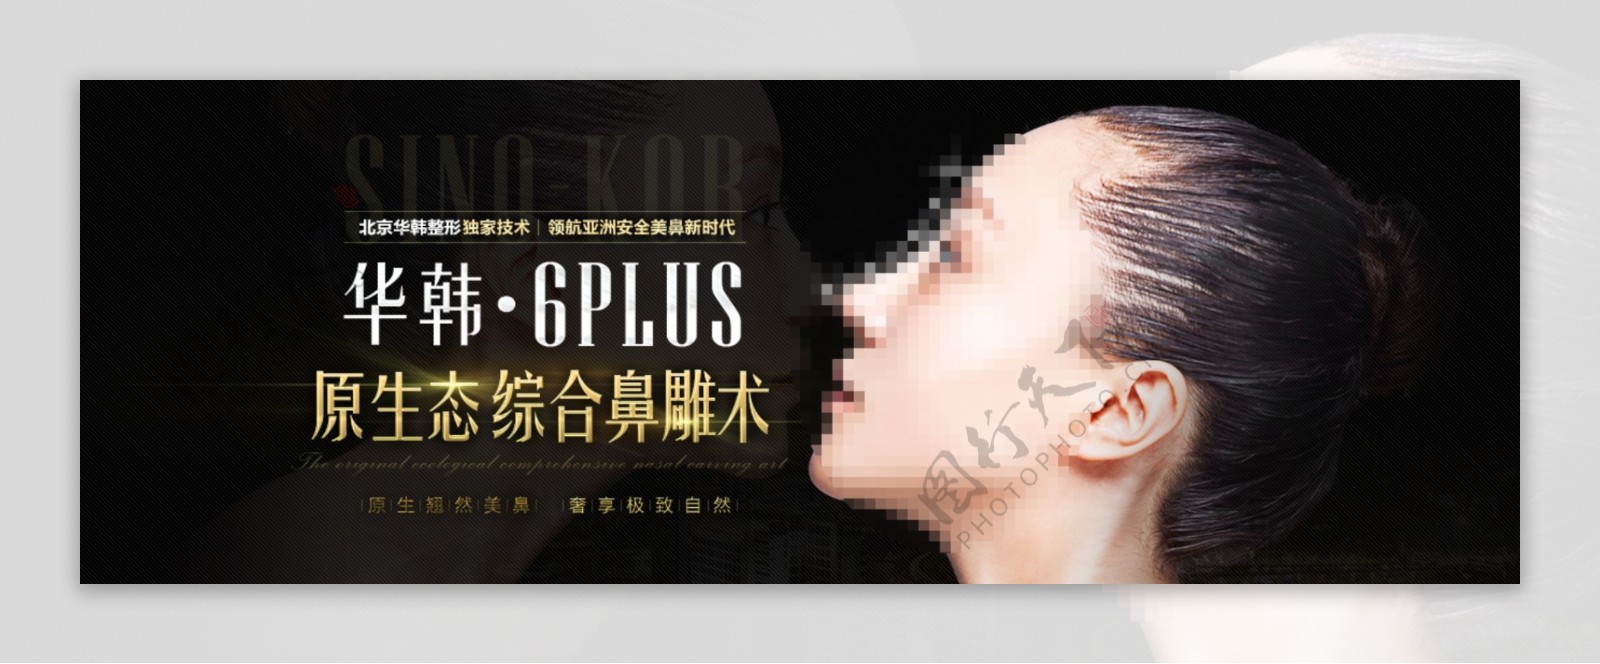 6plus原生态综合隆鼻术banner